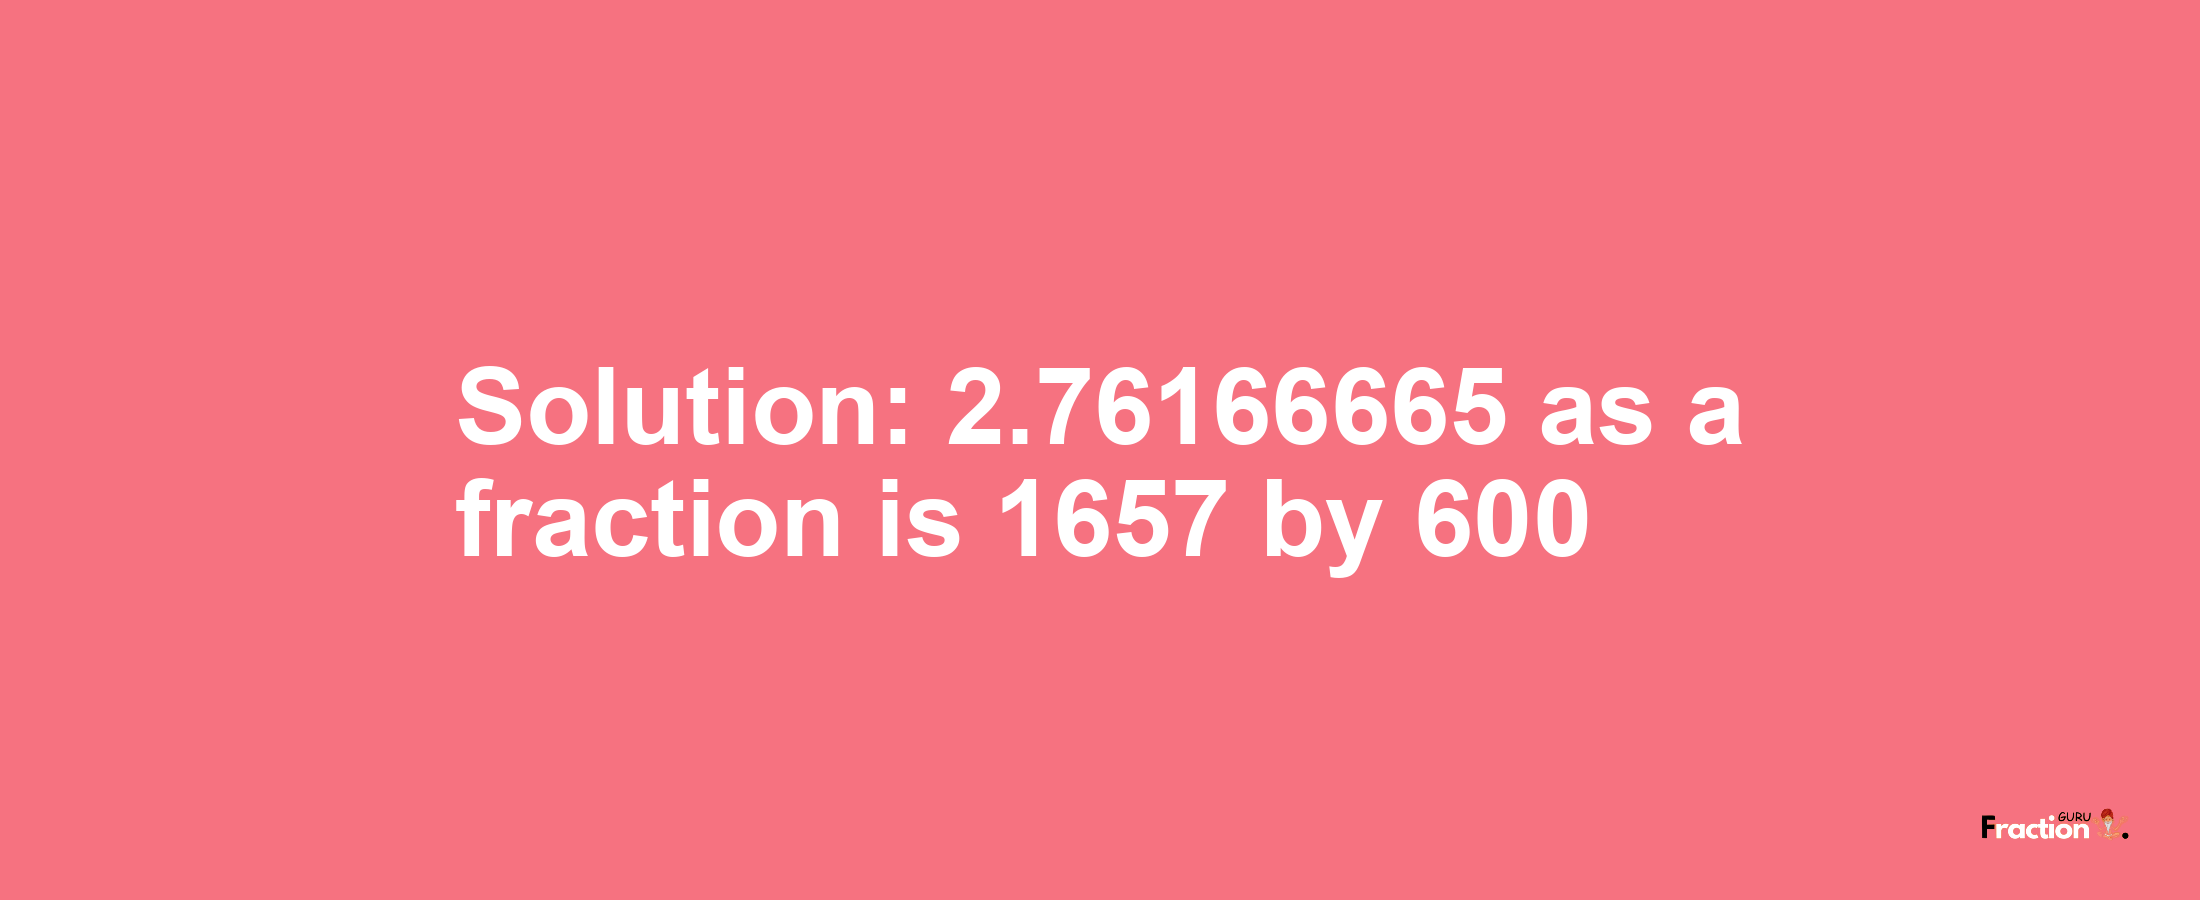 Solution:2.76166665 as a fraction is 1657/600